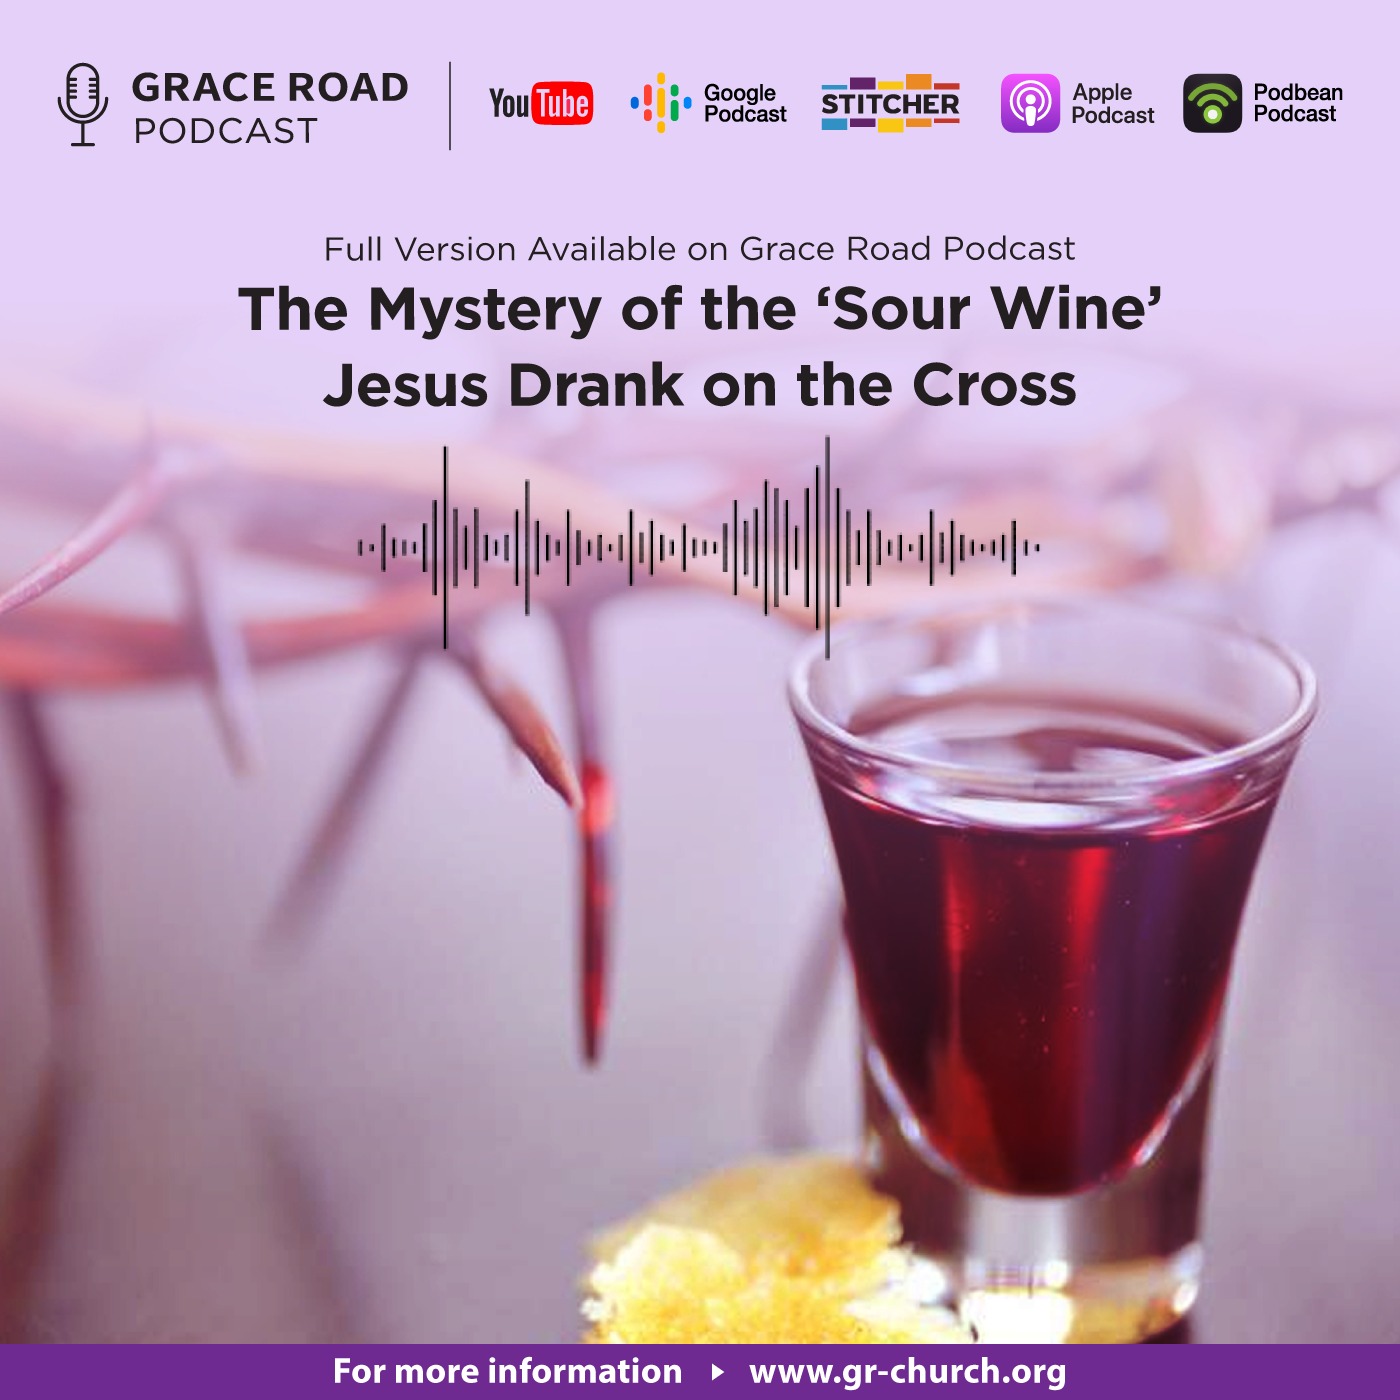 [Trailer] The Mystery of the Sour Wine Jesus Drank on the Cross